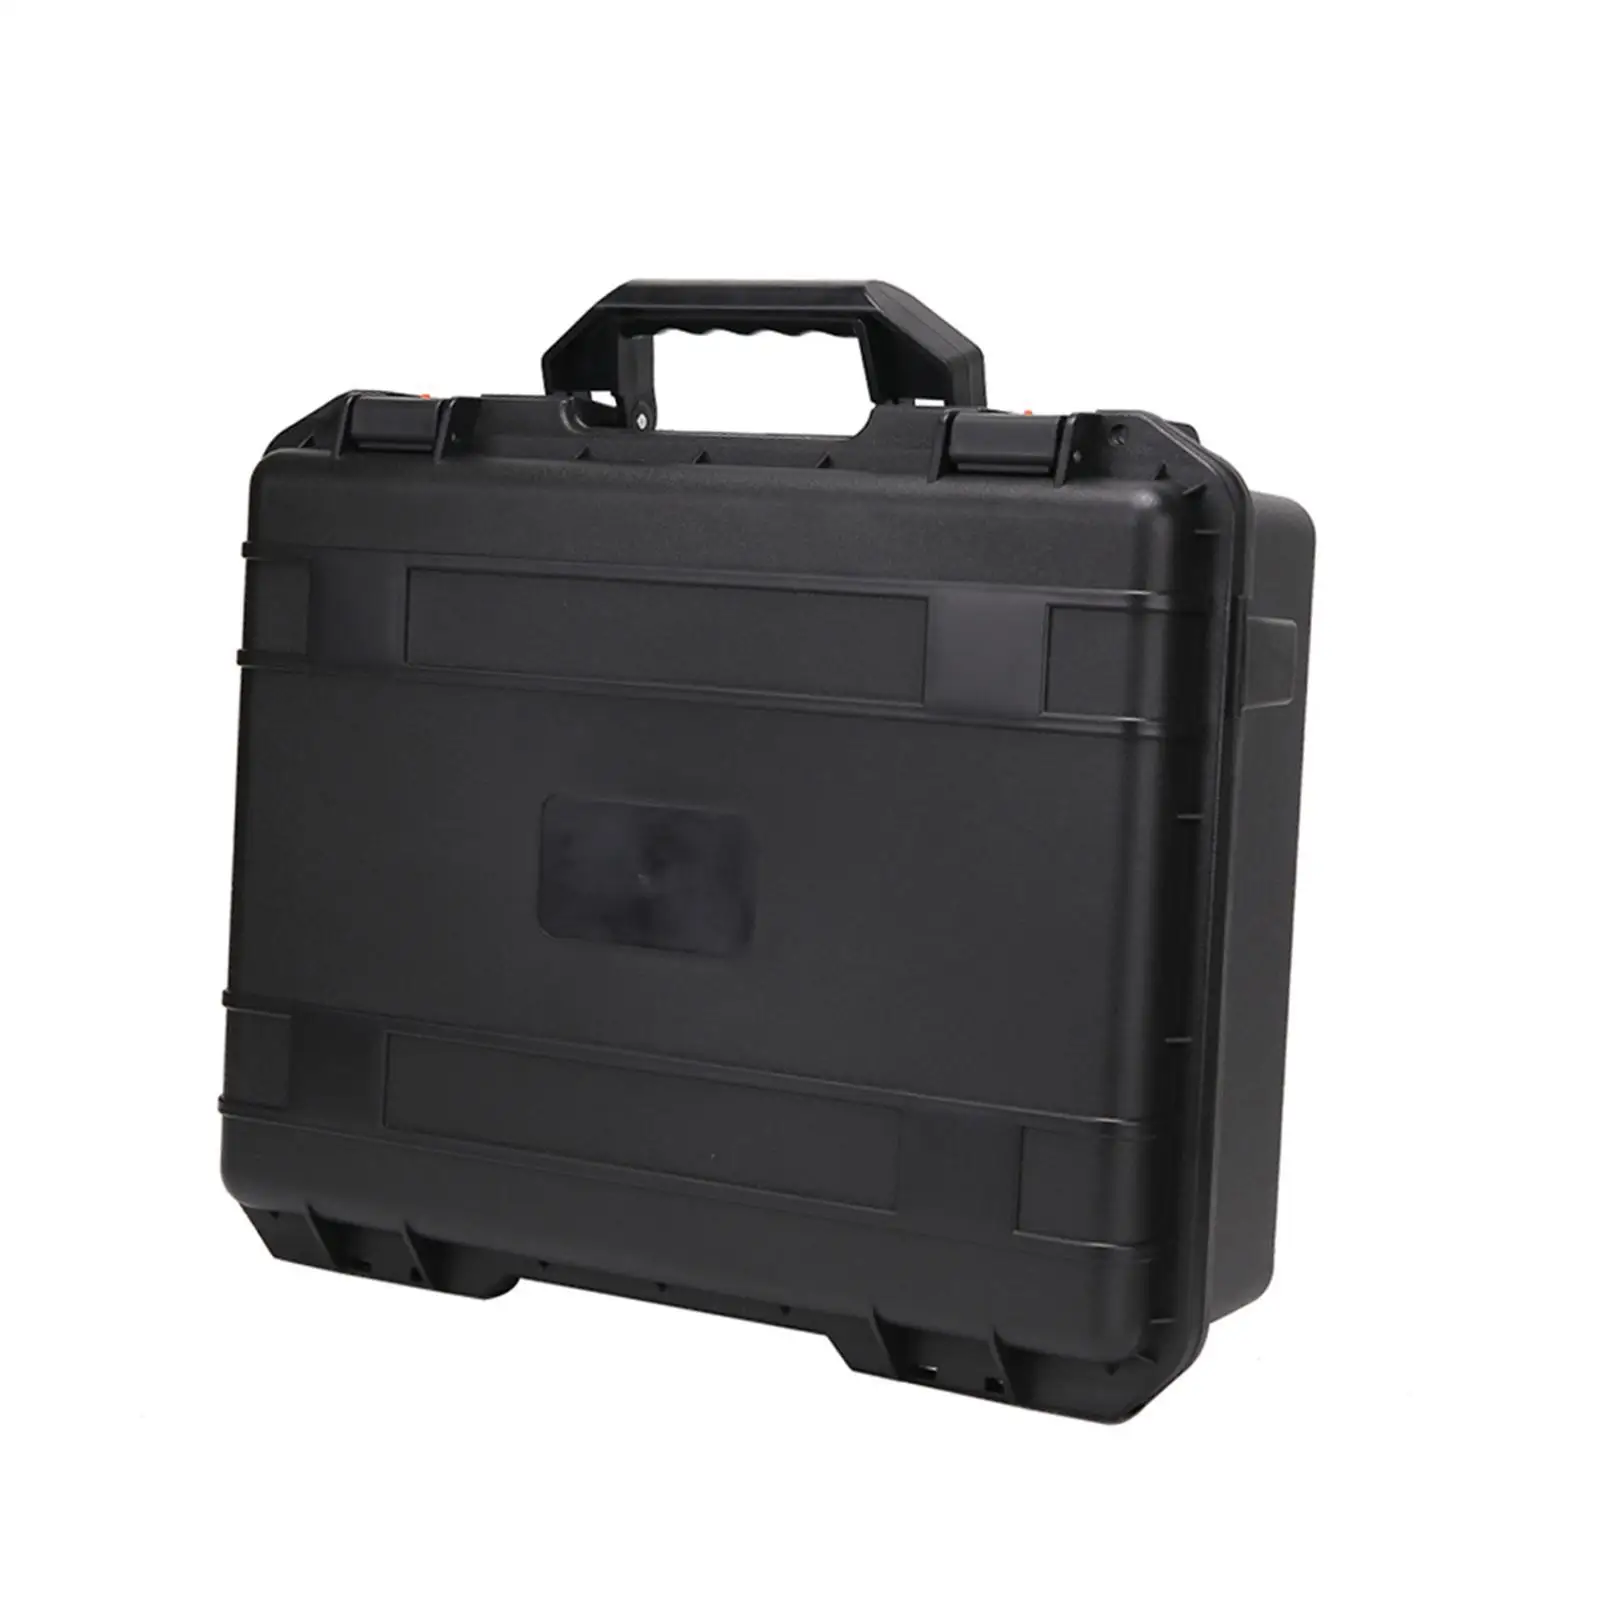 Hard Storage Carrying Case Large Capacity with Carry Handle Waterproof  for   and Accessories 